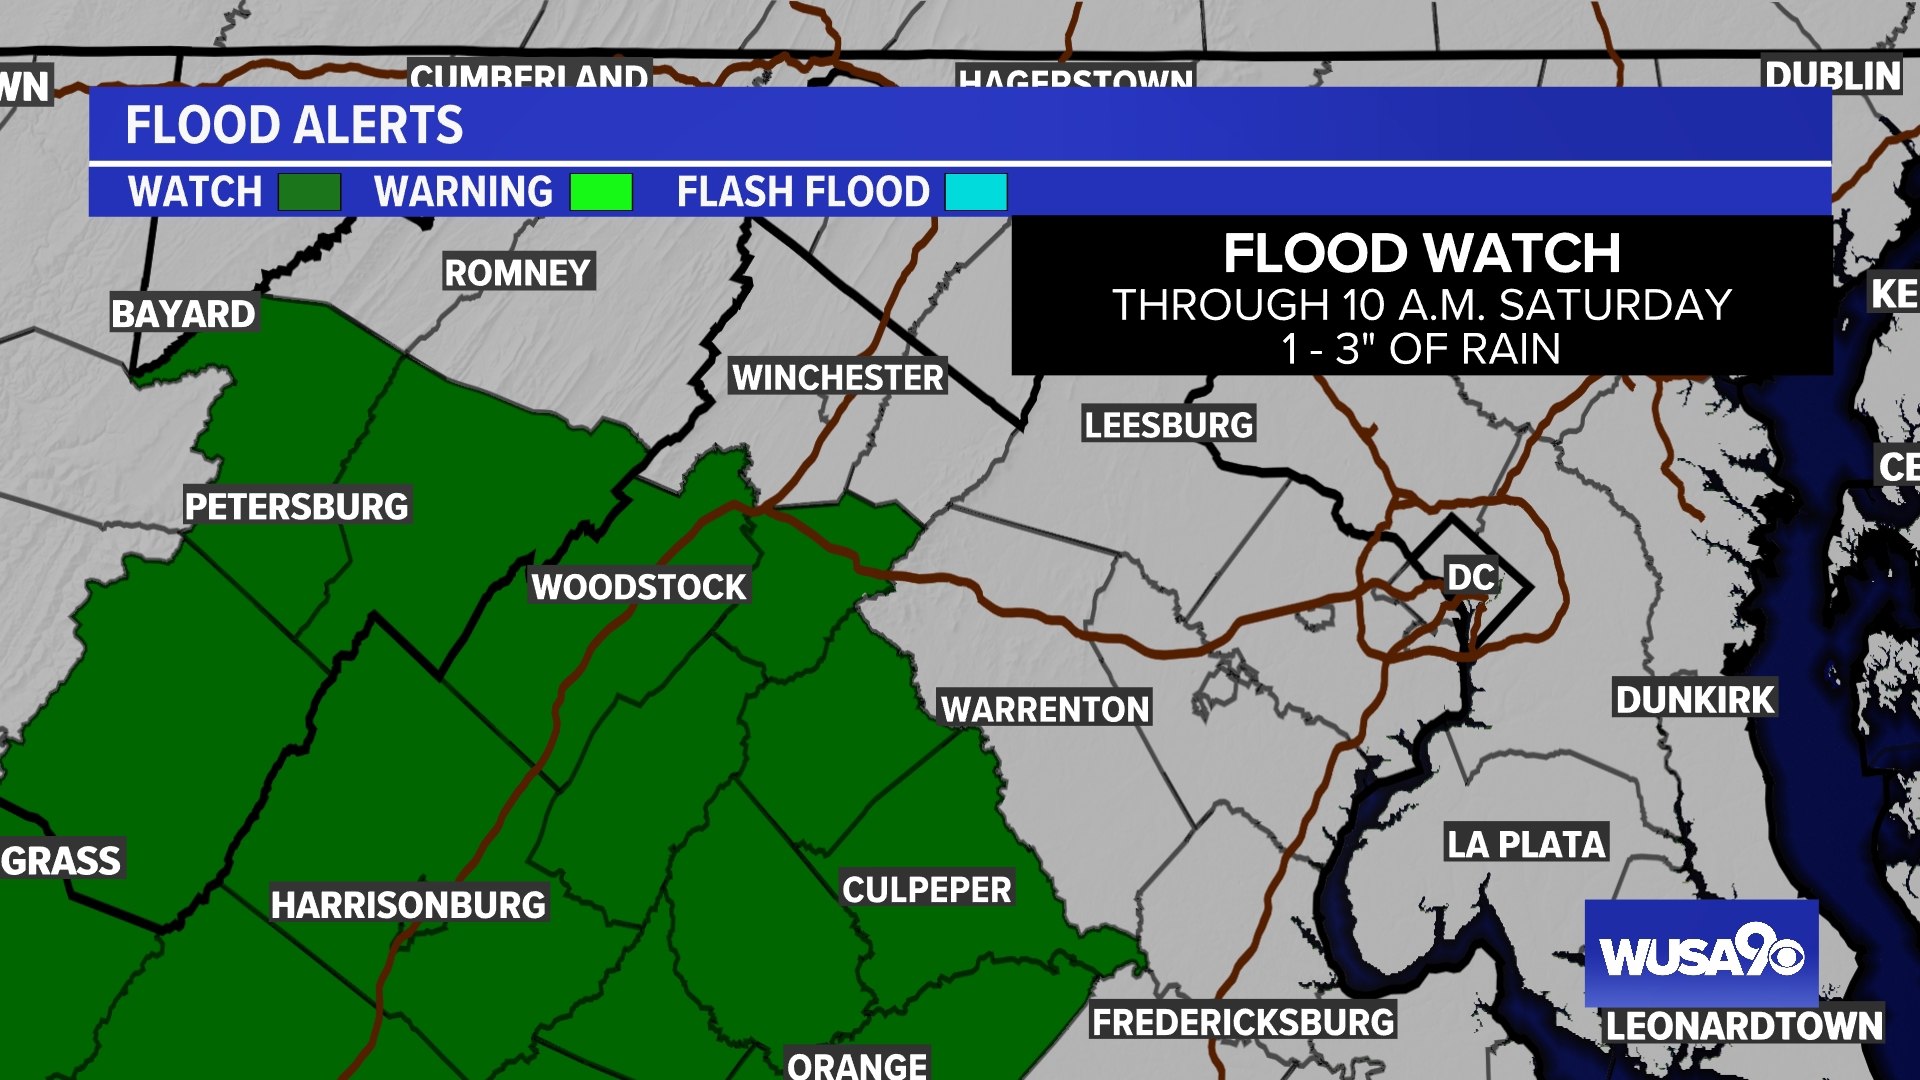 A Flood Watch is in effect for areas south and west of D.C.